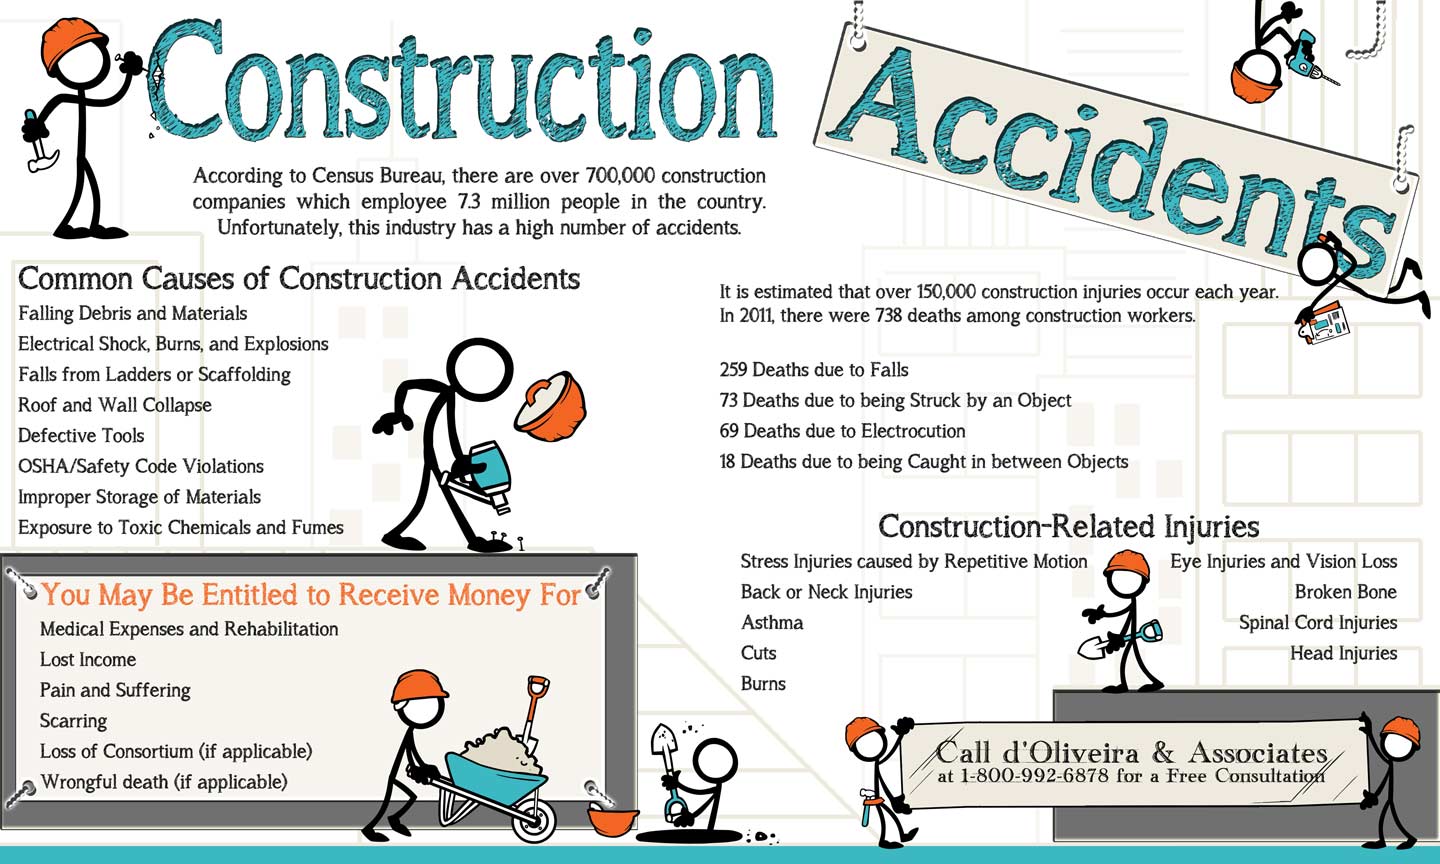 Construction Accidents Infographic and Construction Dangers